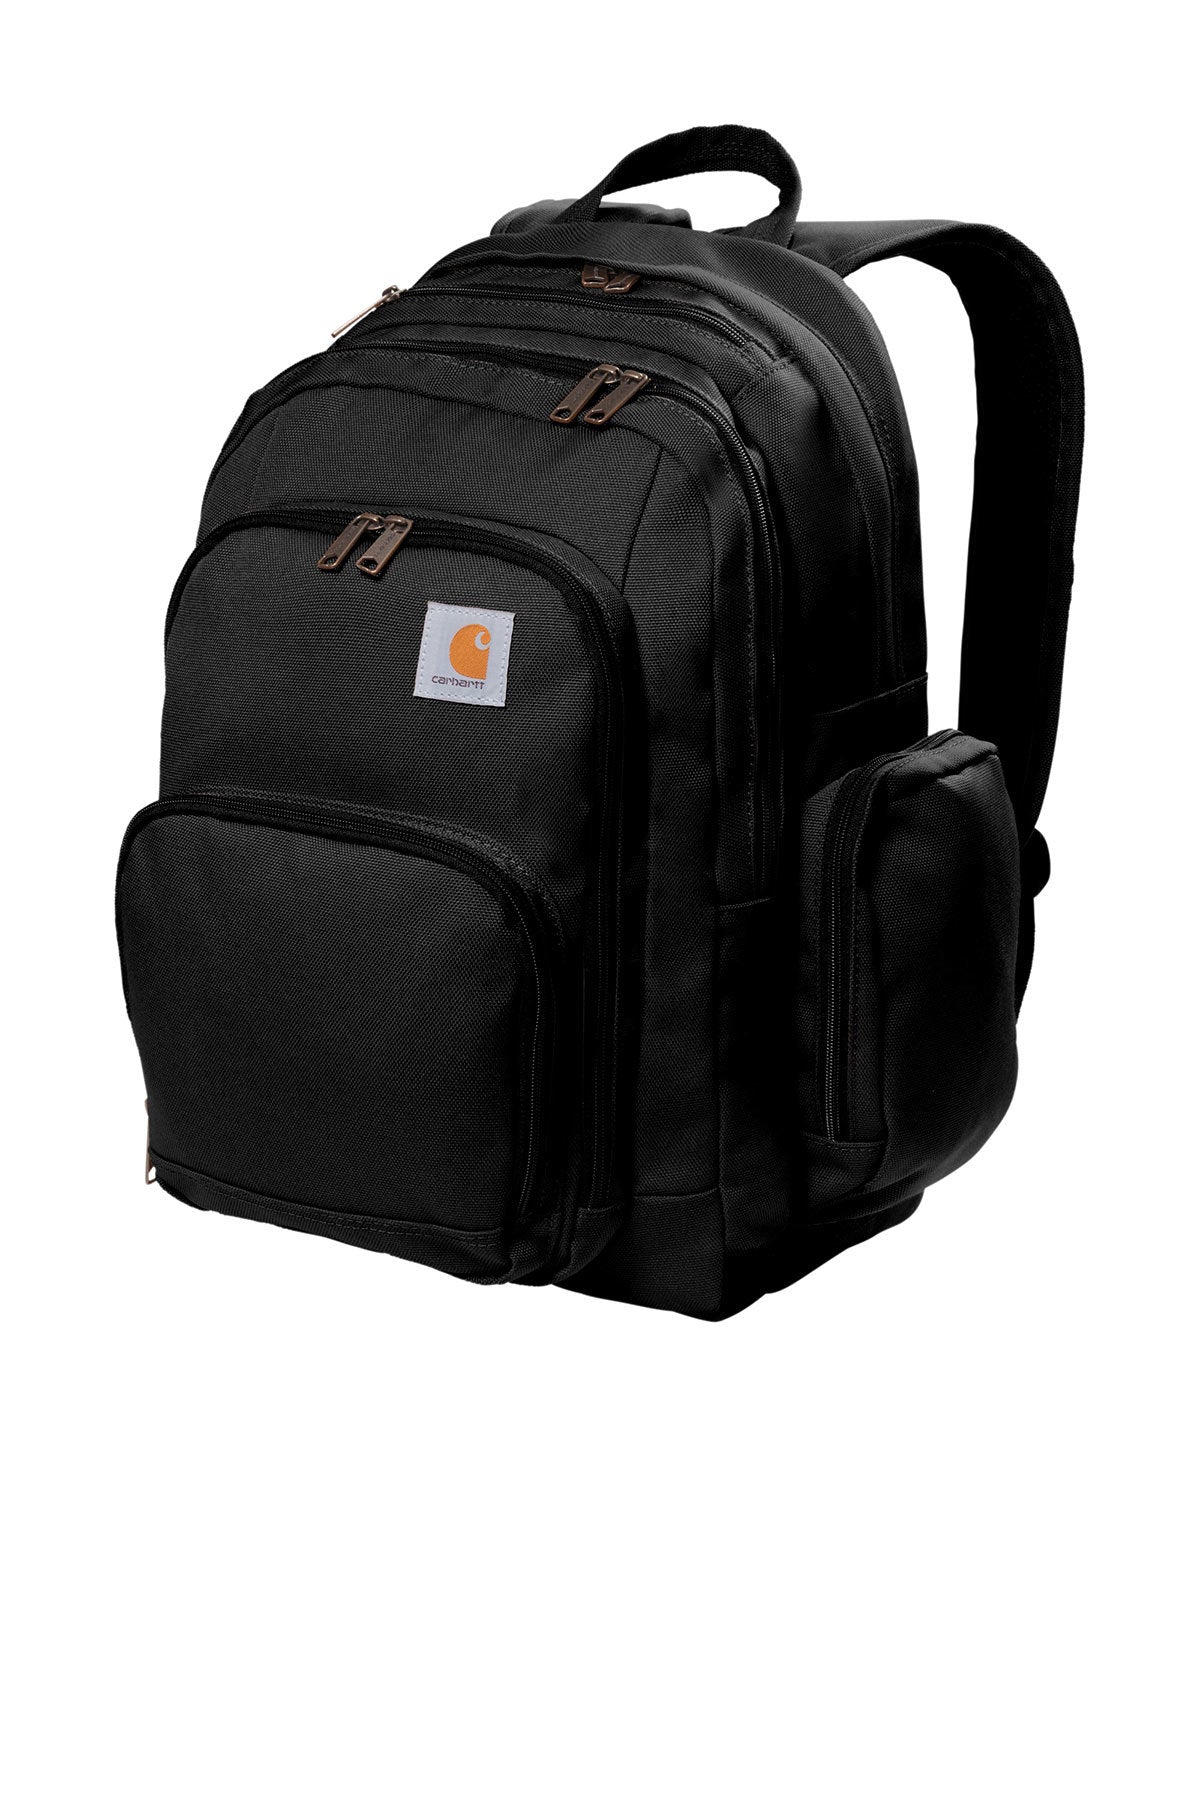 CT89176508 Carhartt ® Foundry Series Pro Backpack